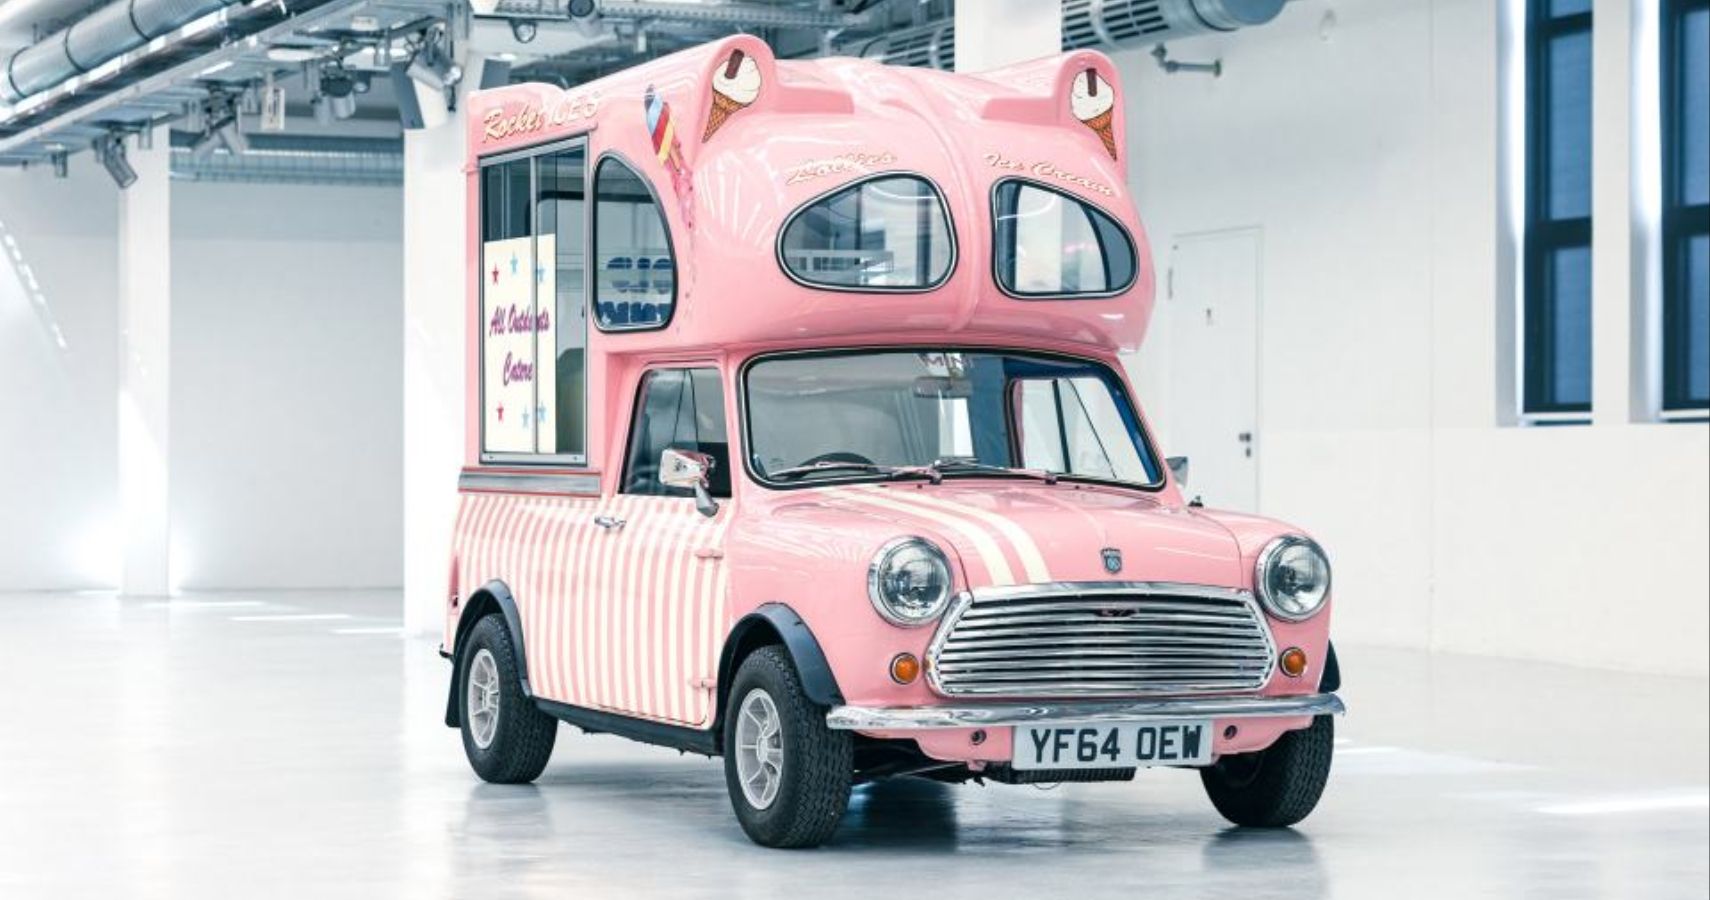 Check Out This Truly Epic Classic Mini Ice Cream Van